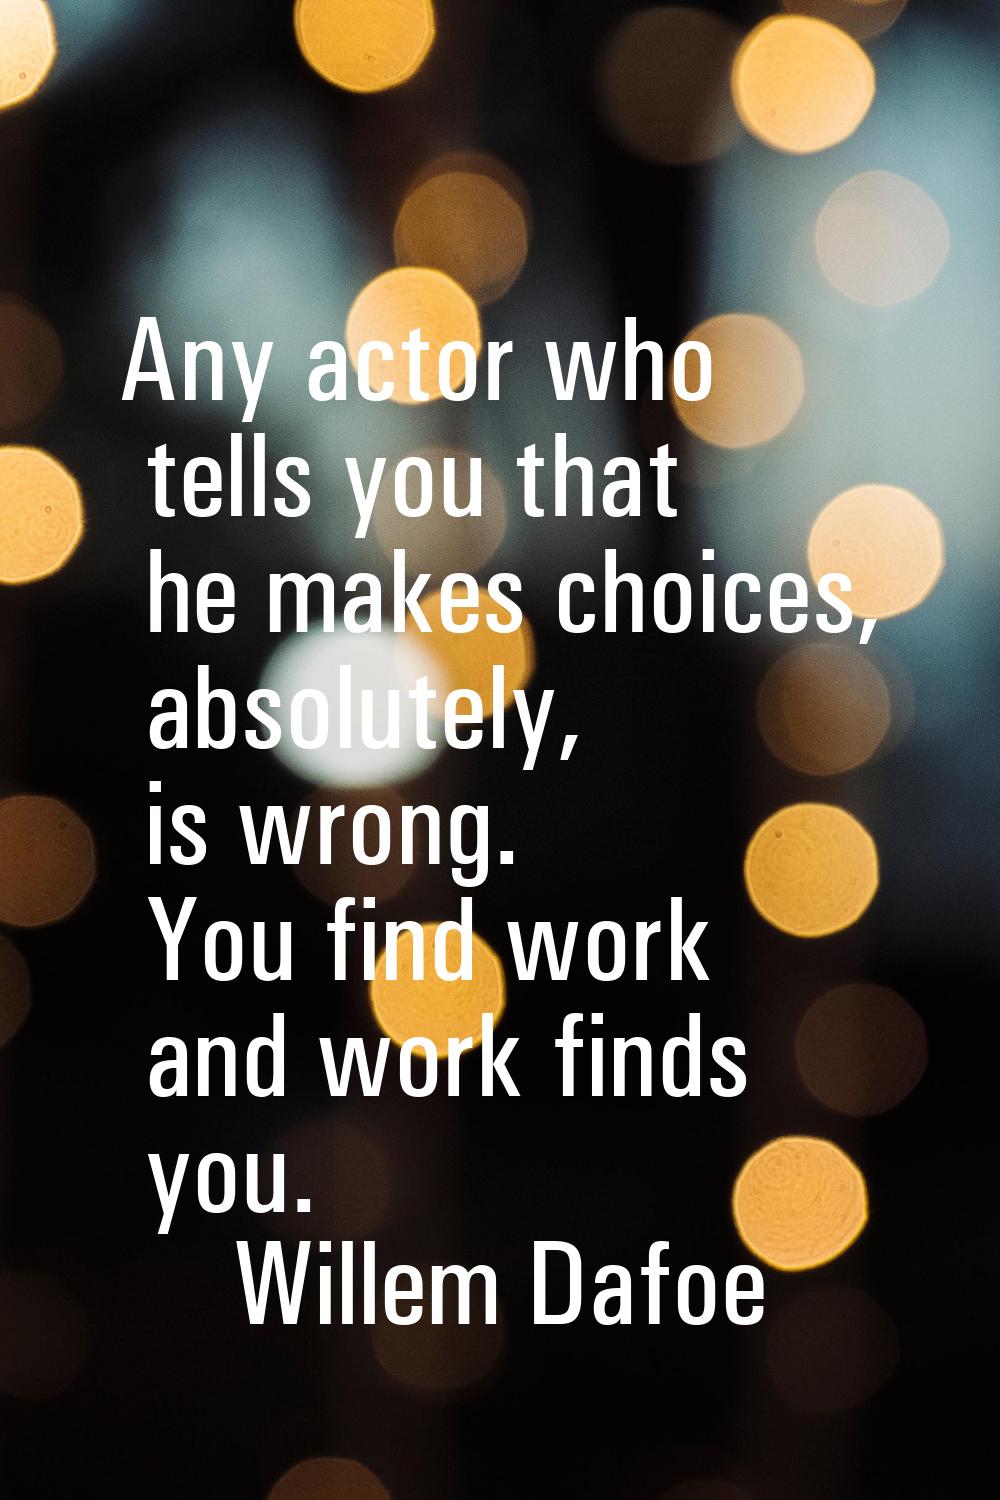 Any actor who tells you that he makes choices, absolutely, is wrong. You find work and work finds y